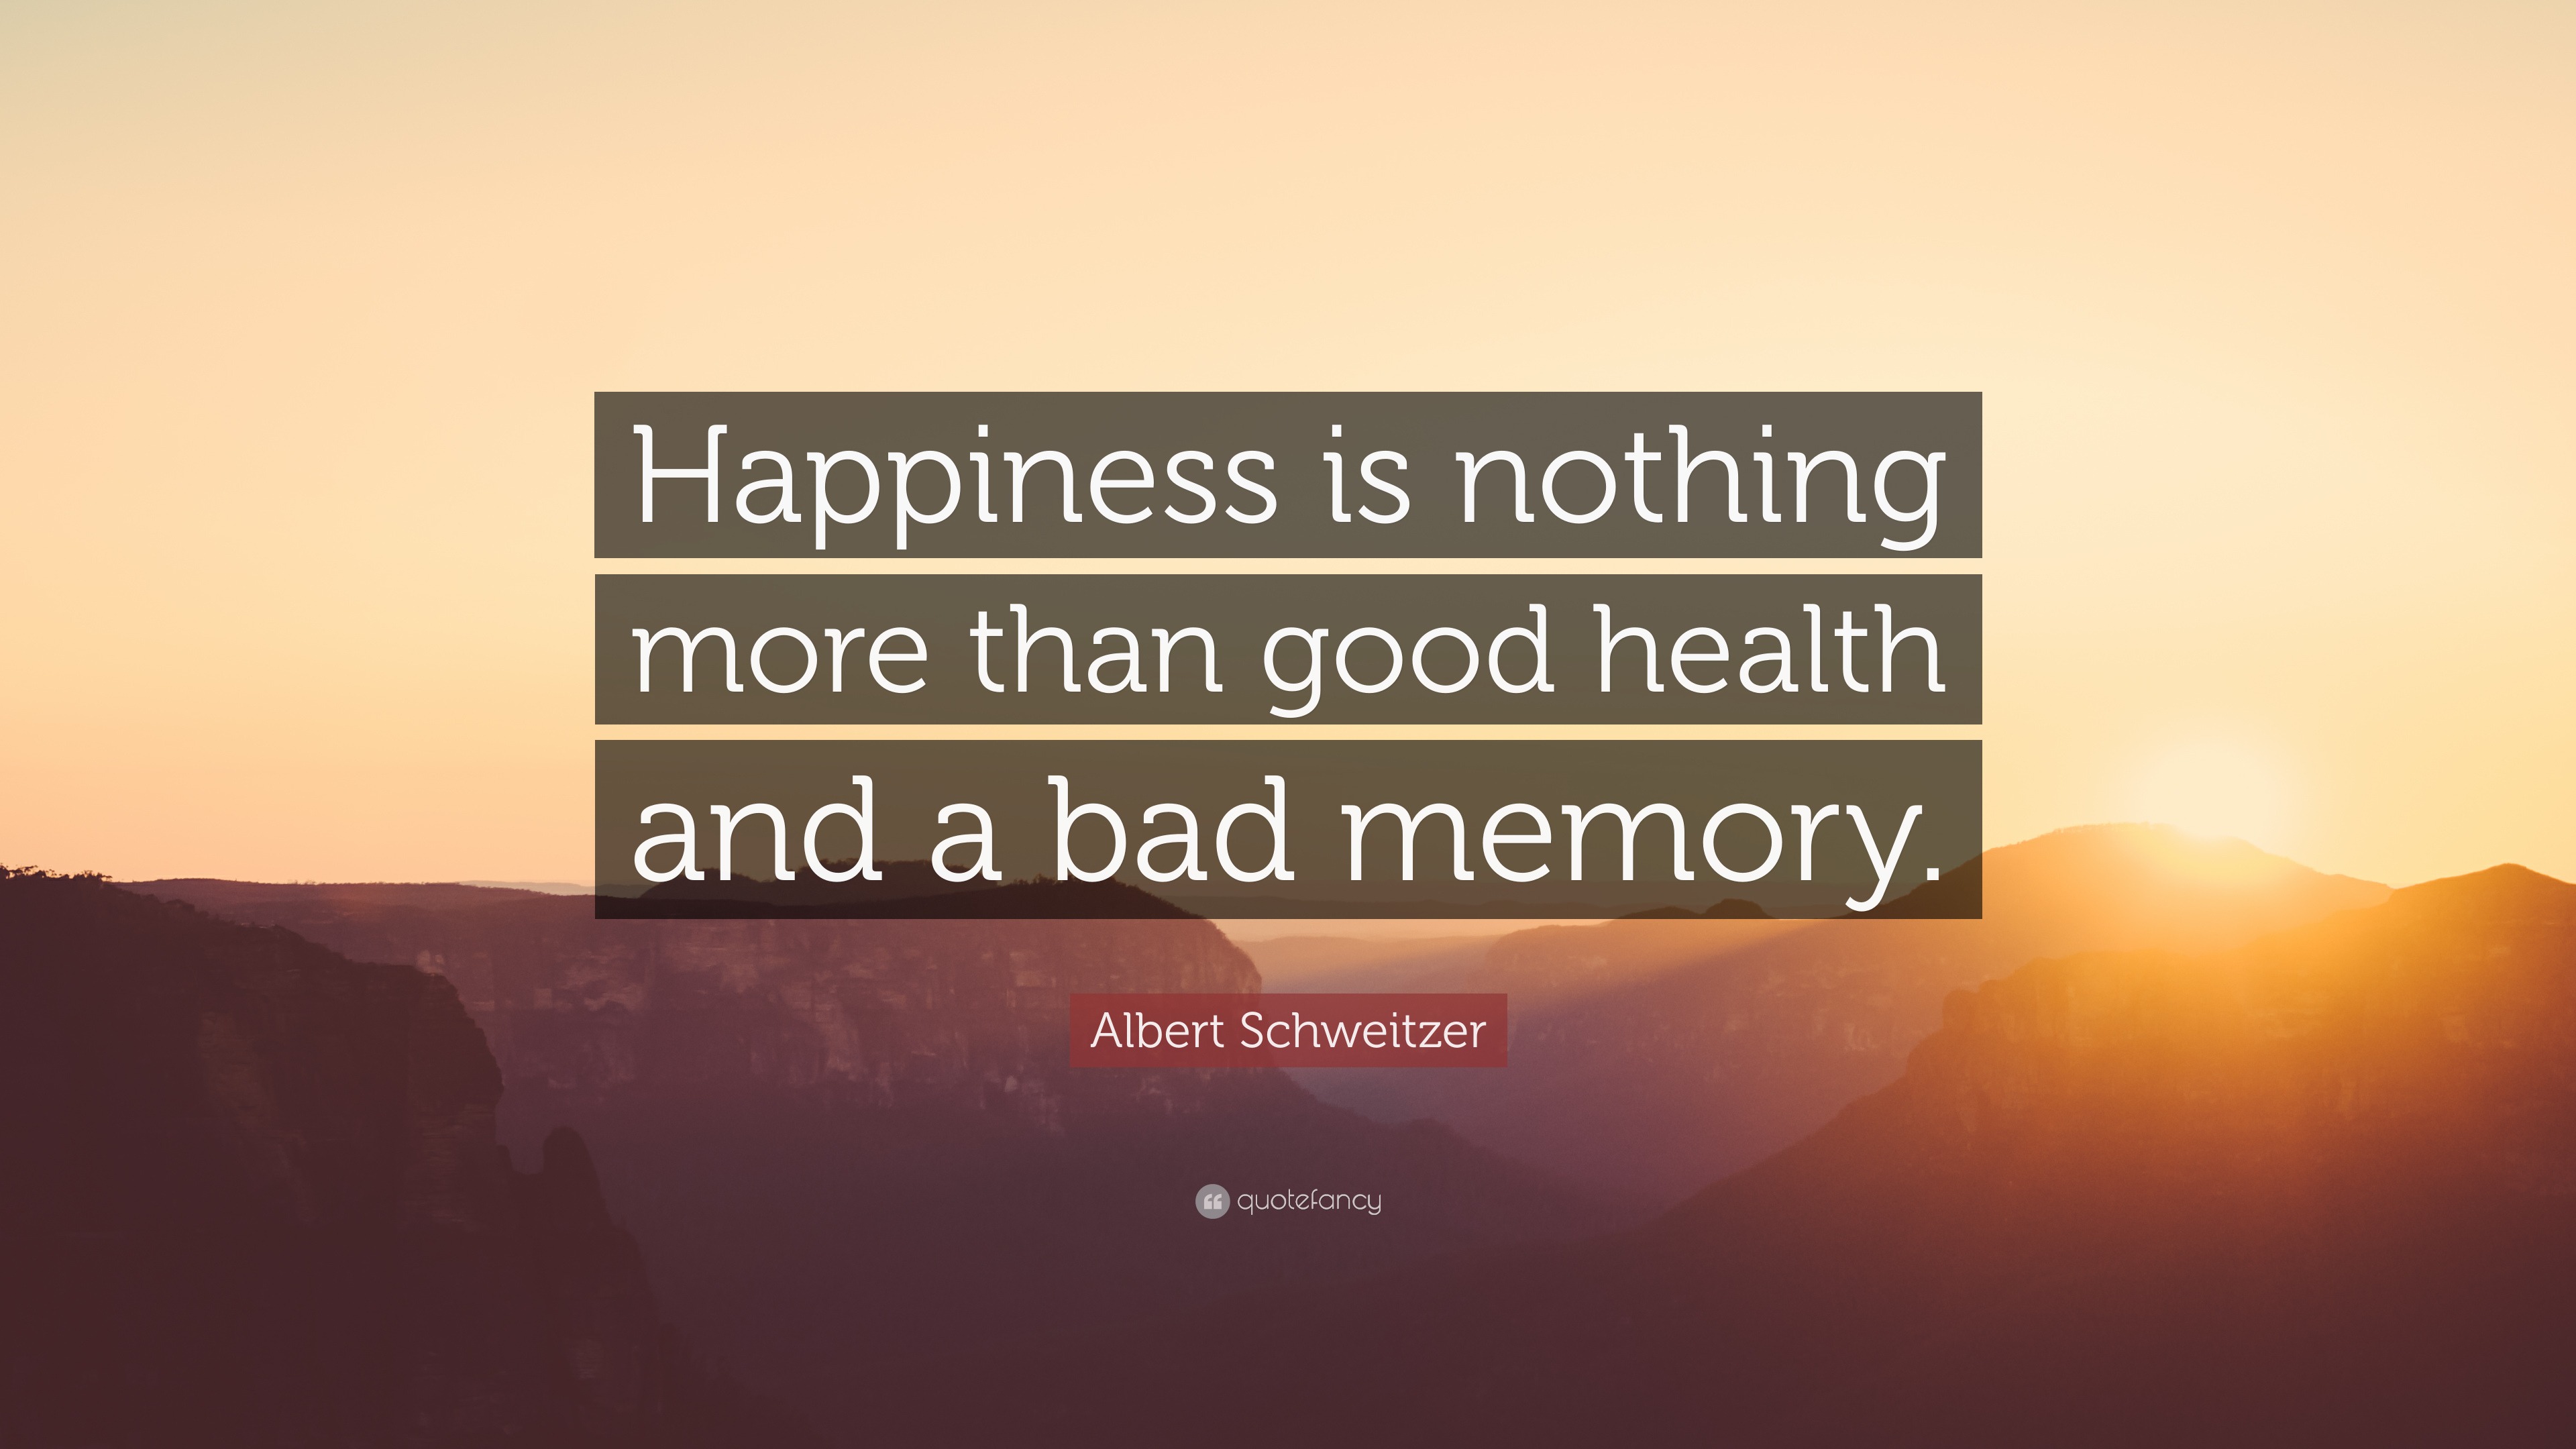 Albert Schweitzer Quote: “Happiness is nothing more than good health ...